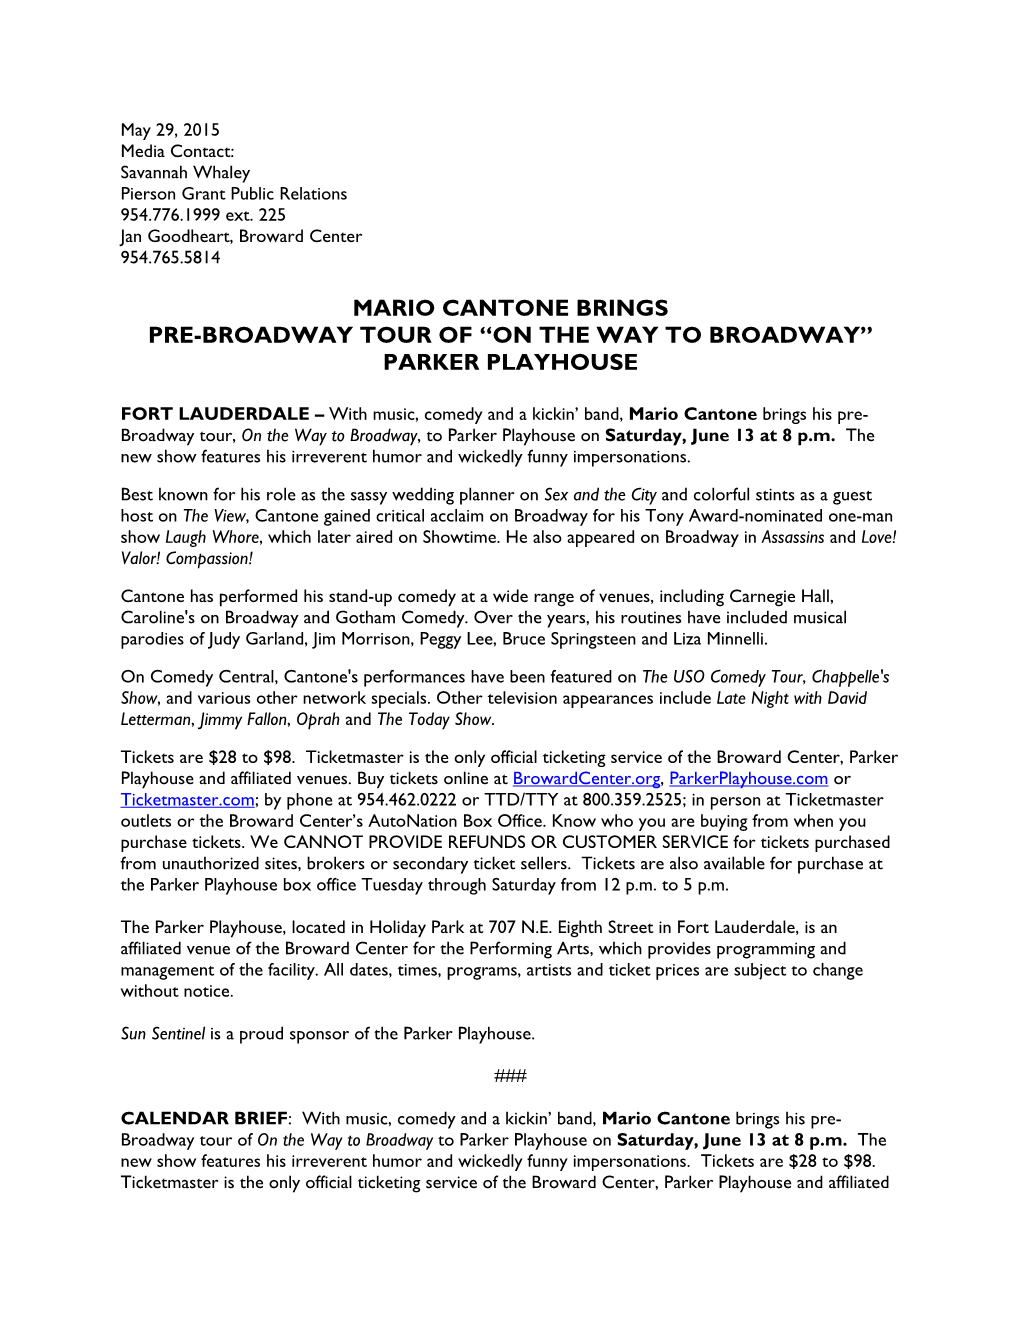 Mario Cantone Brings Pre-Broadway Tour of “On the Way to Broadway” Parker Playhouse